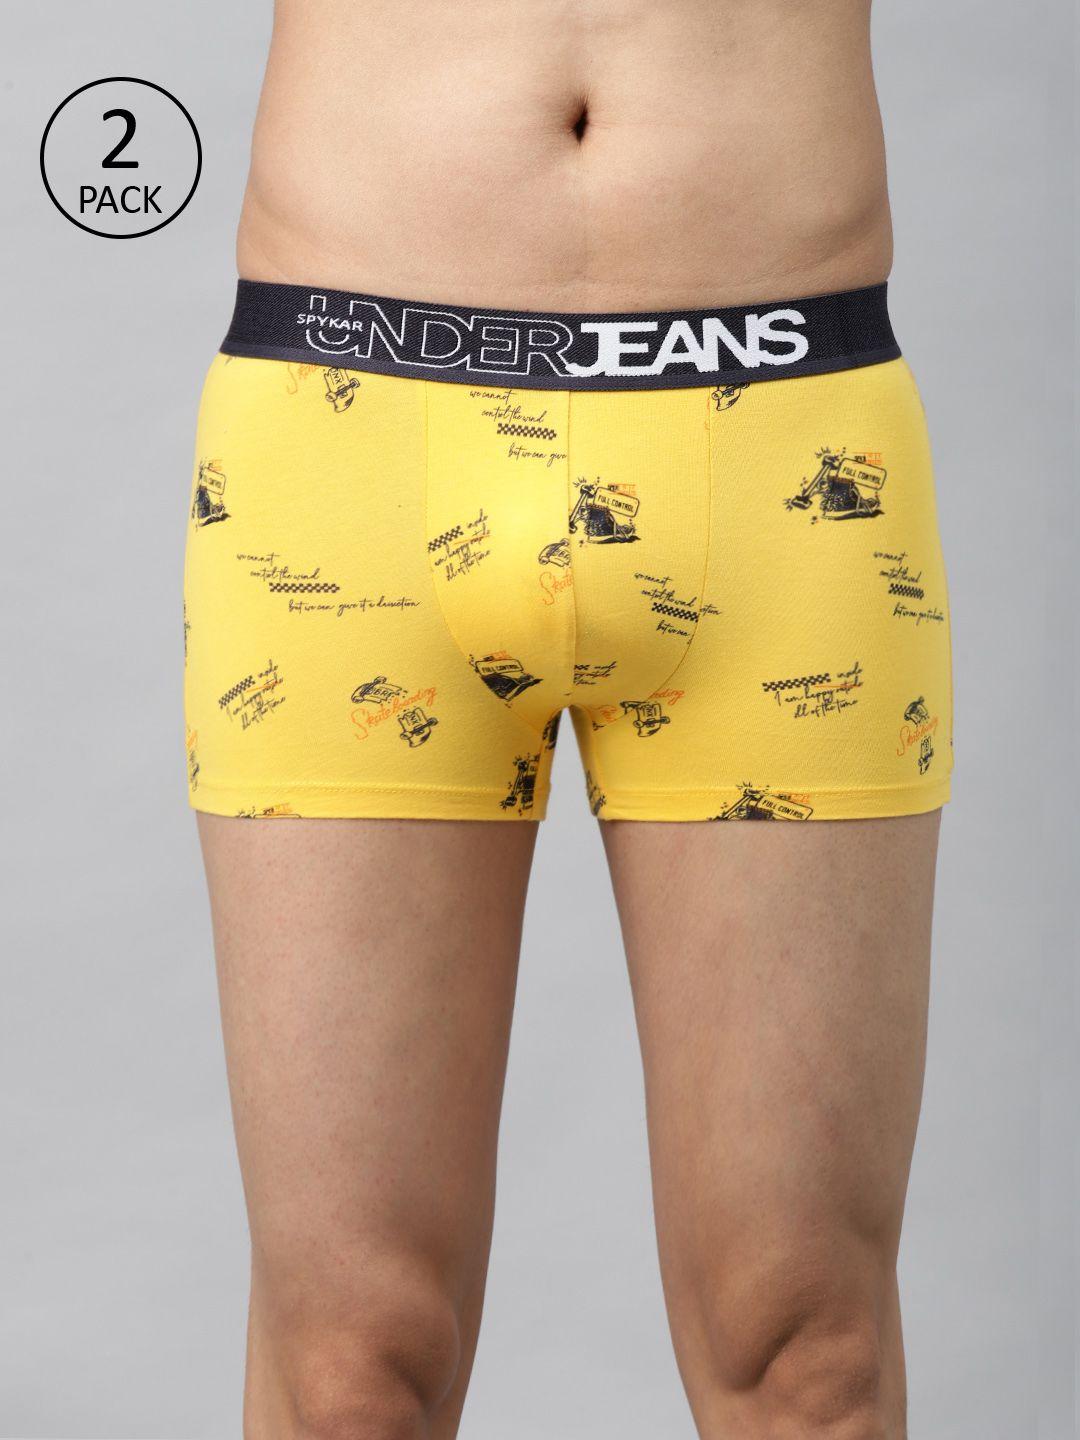 underjeans by spykar men pack of 2 yellow & navy blue printed trunks 8907966433601